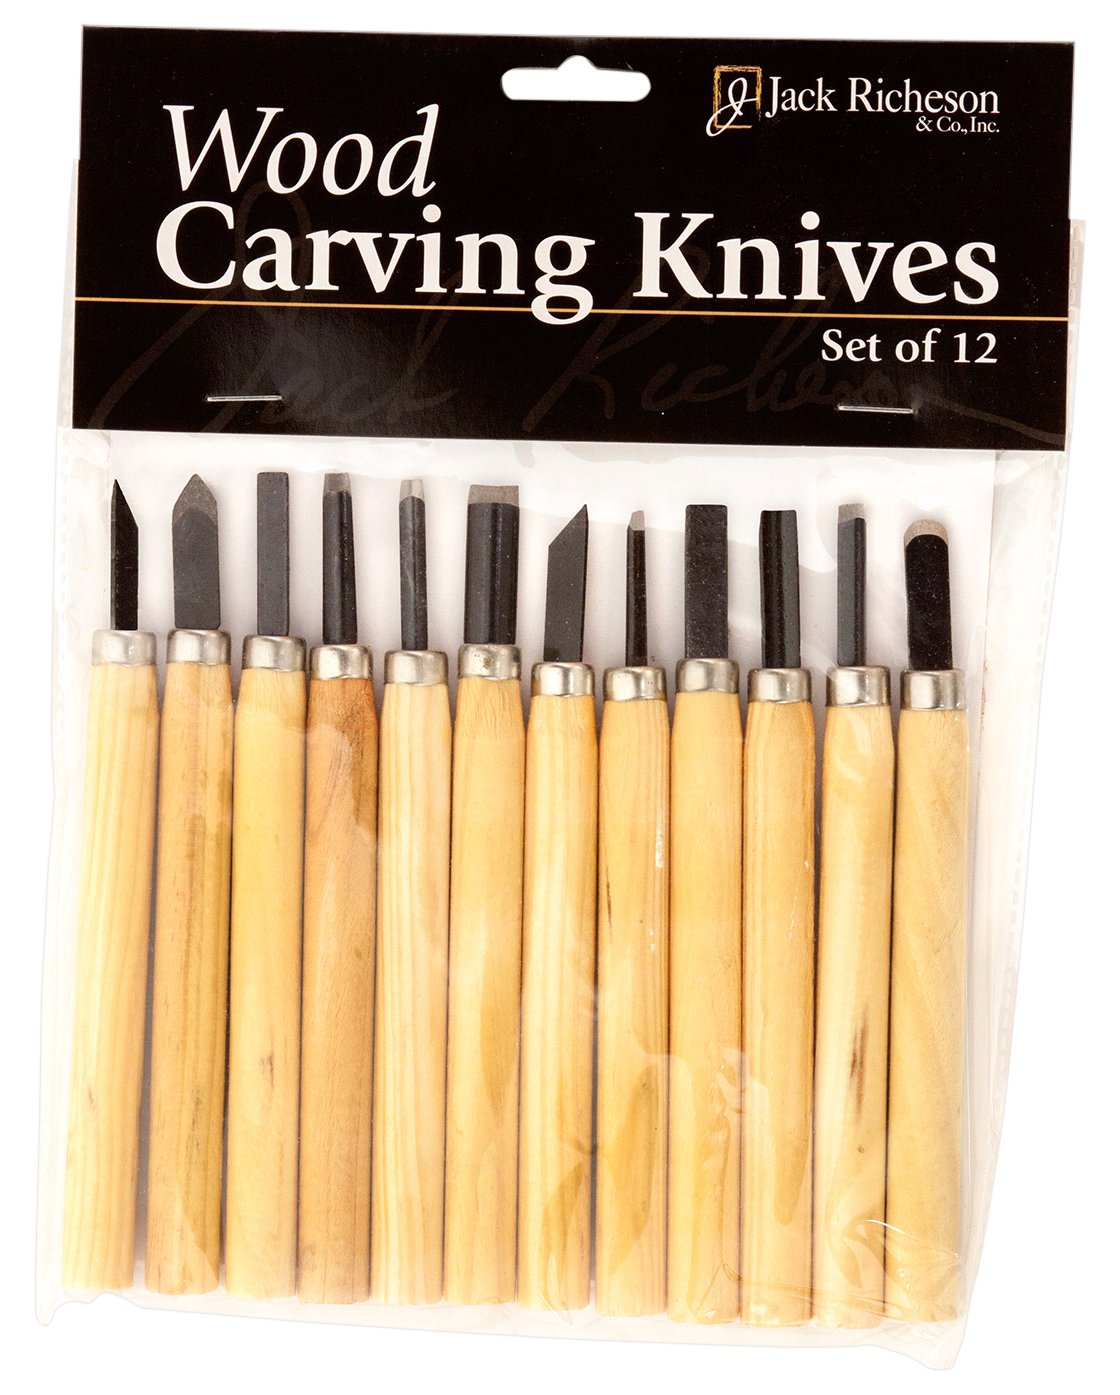 S10 - Wood Carving Set of 12 Knives